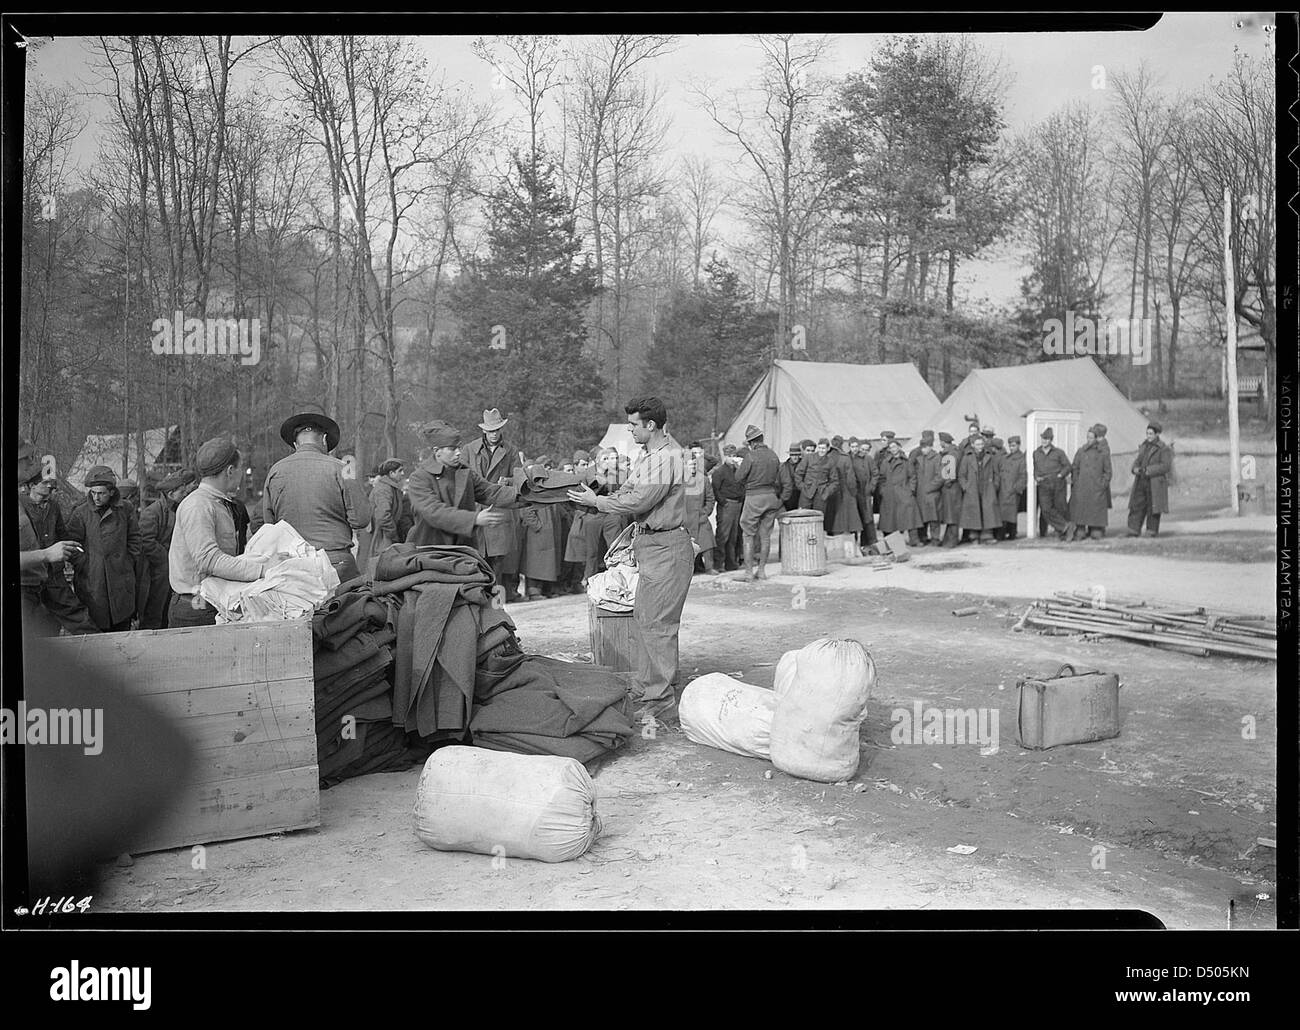 Issuing cots and blankets to new replacements just arrived from New York at CCC Camp, TVA #23, November 1933 Stock Photo